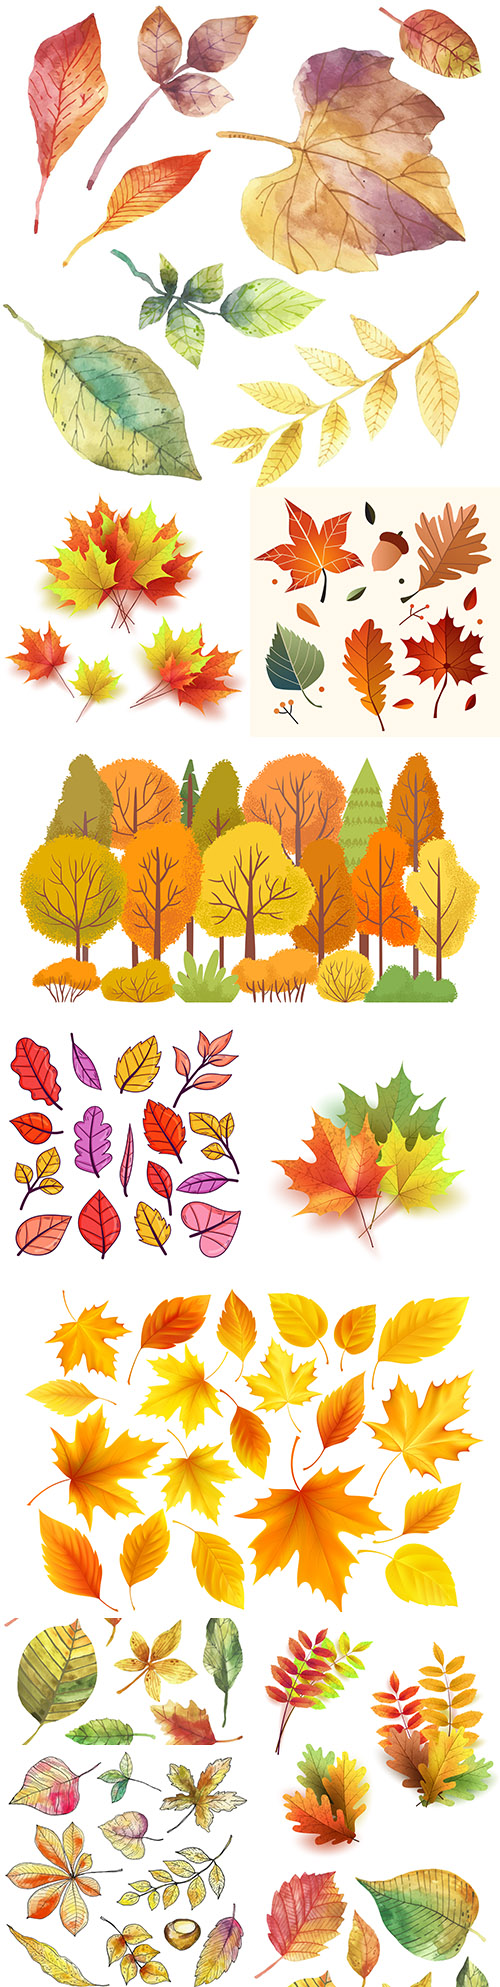 Autumn bright colorful different leaves illustration collection
